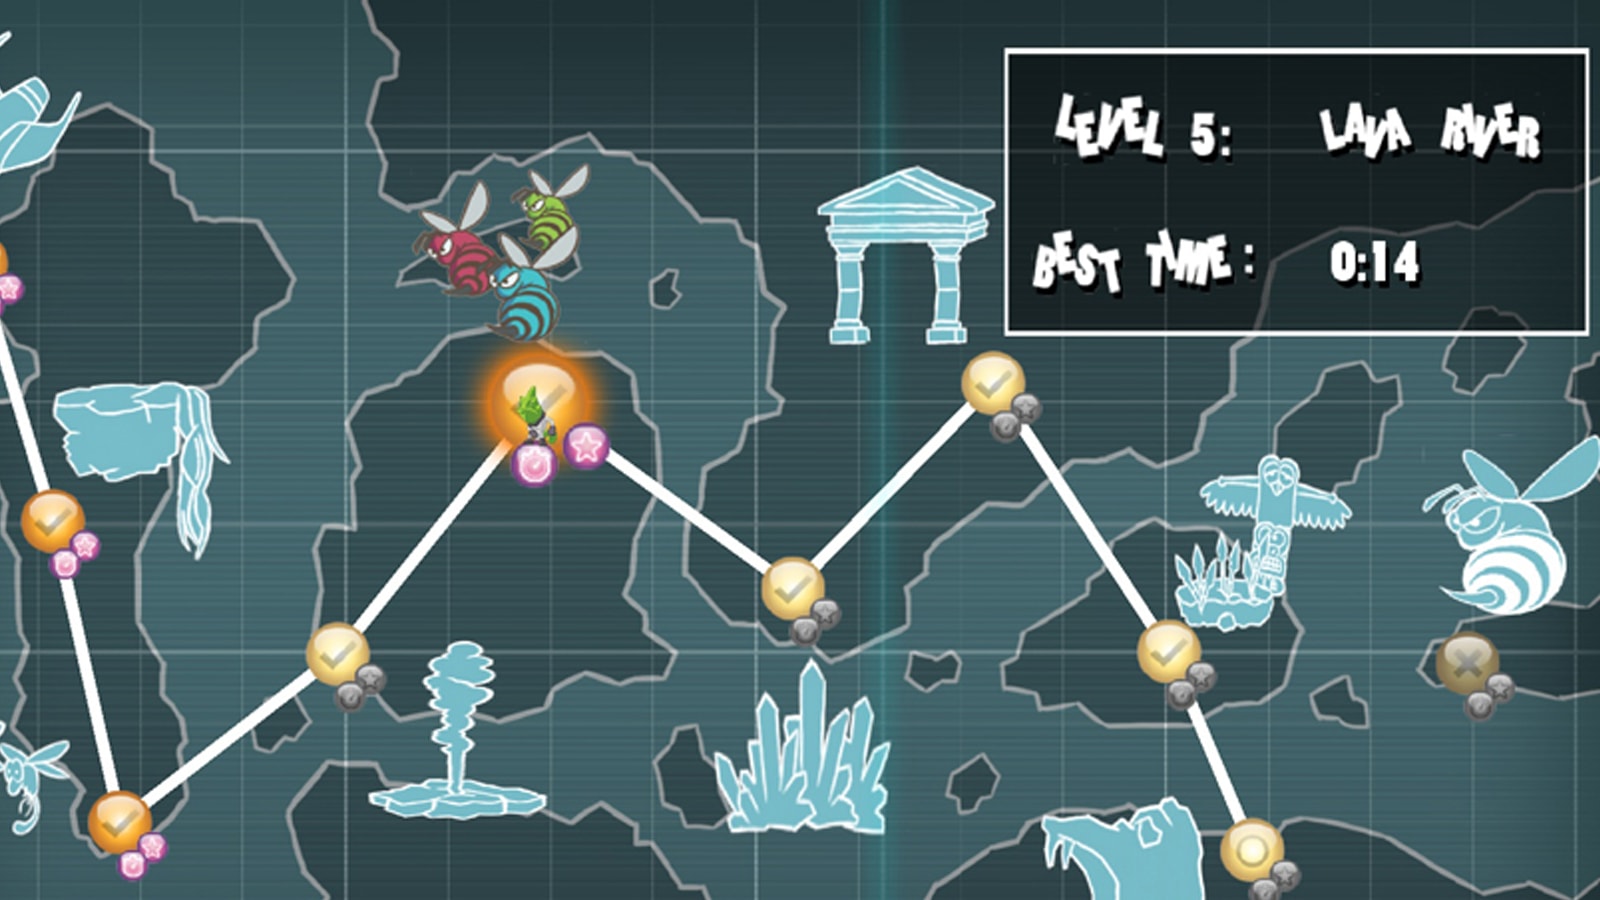 The game&#039;s overworld map, full of icons for different levels